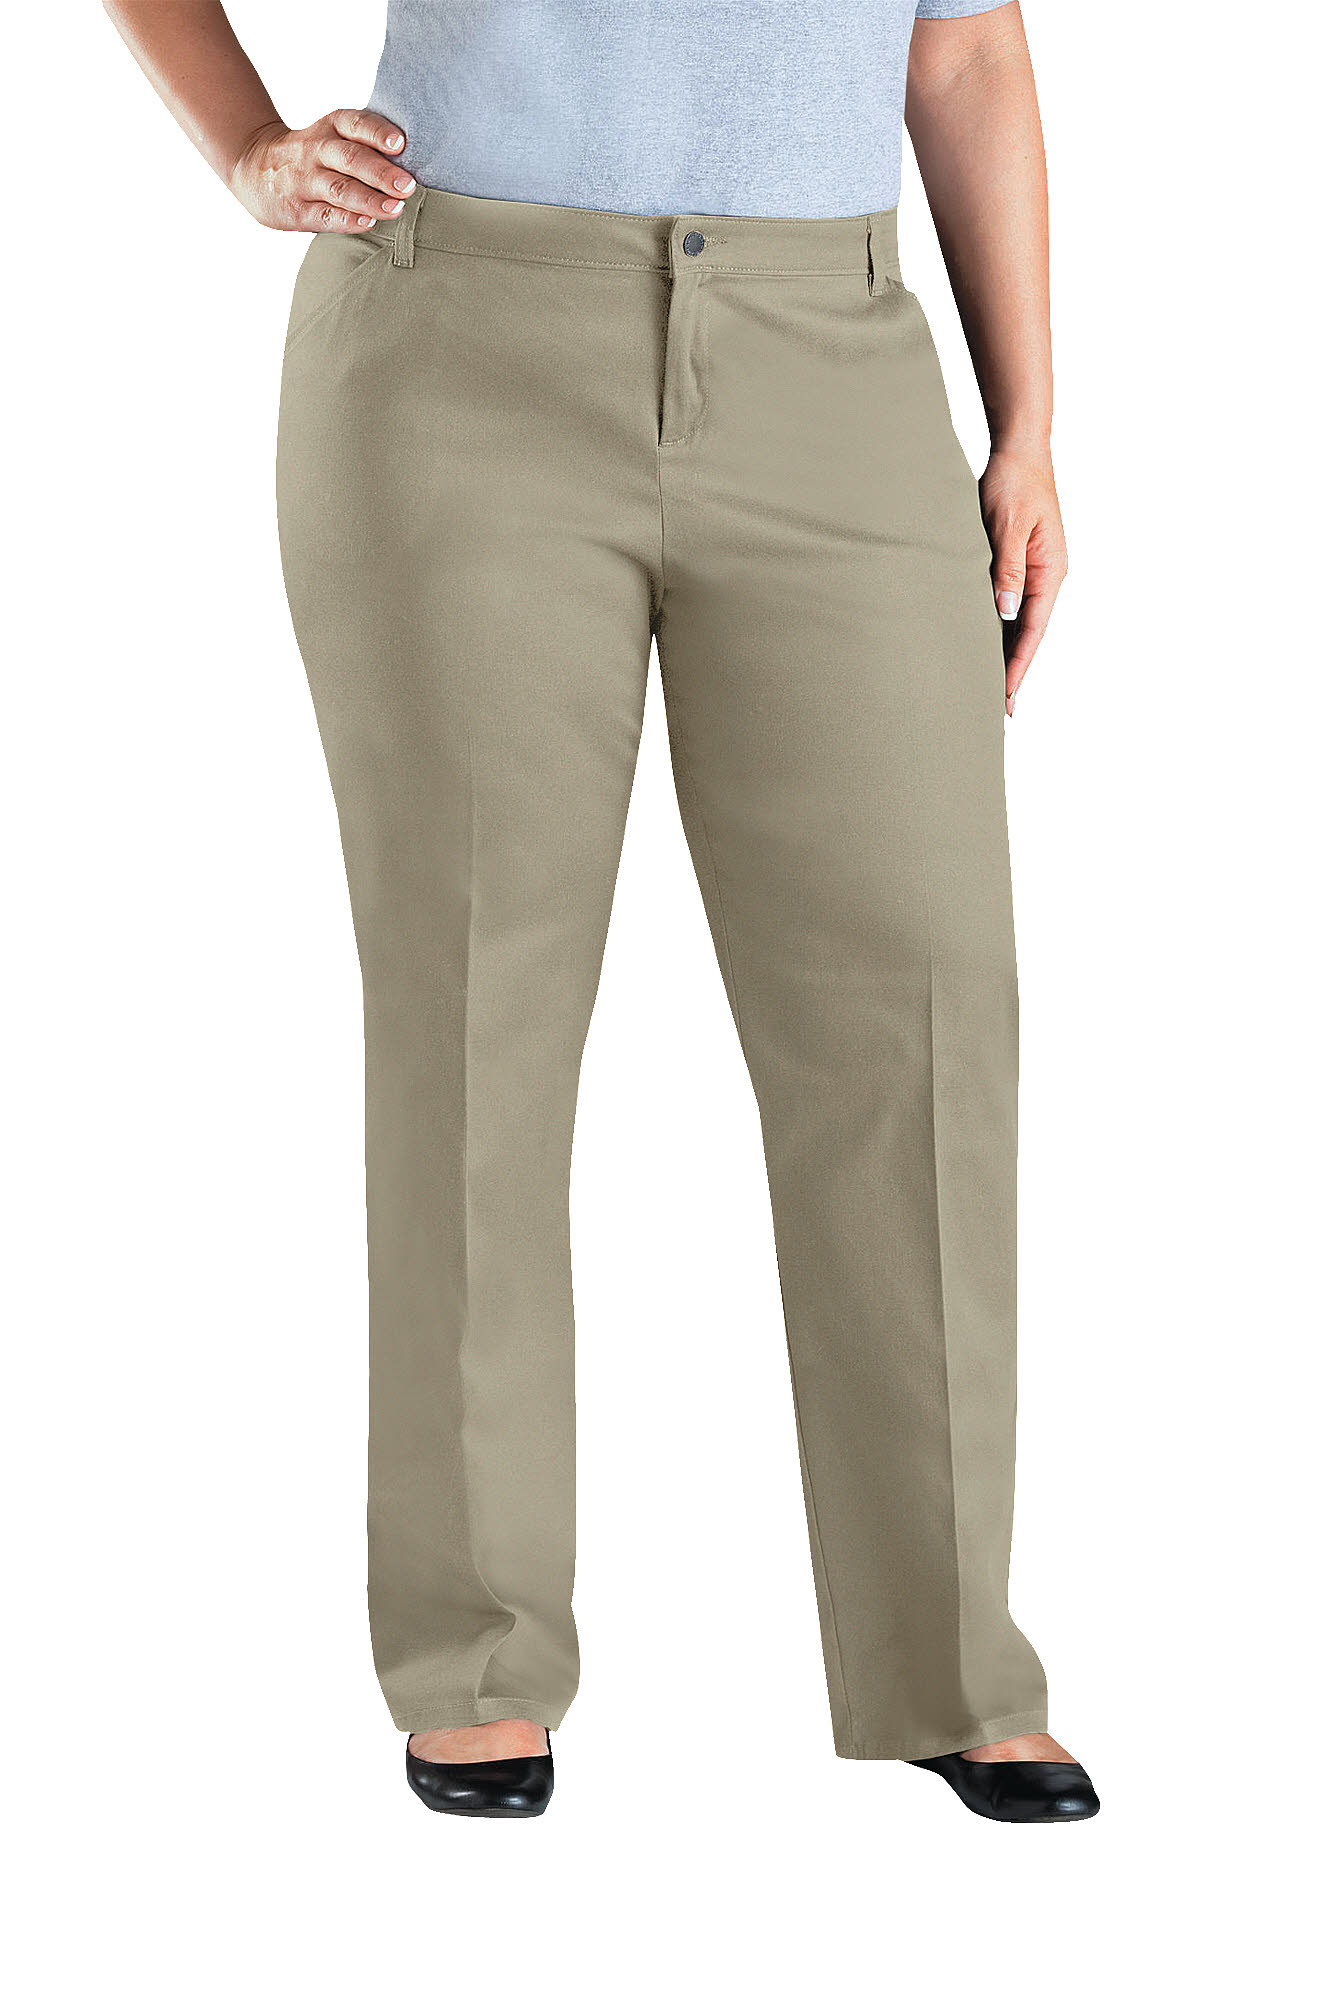 Genuine Dickies Women's Relaxed Straight Stretch Twill Pants